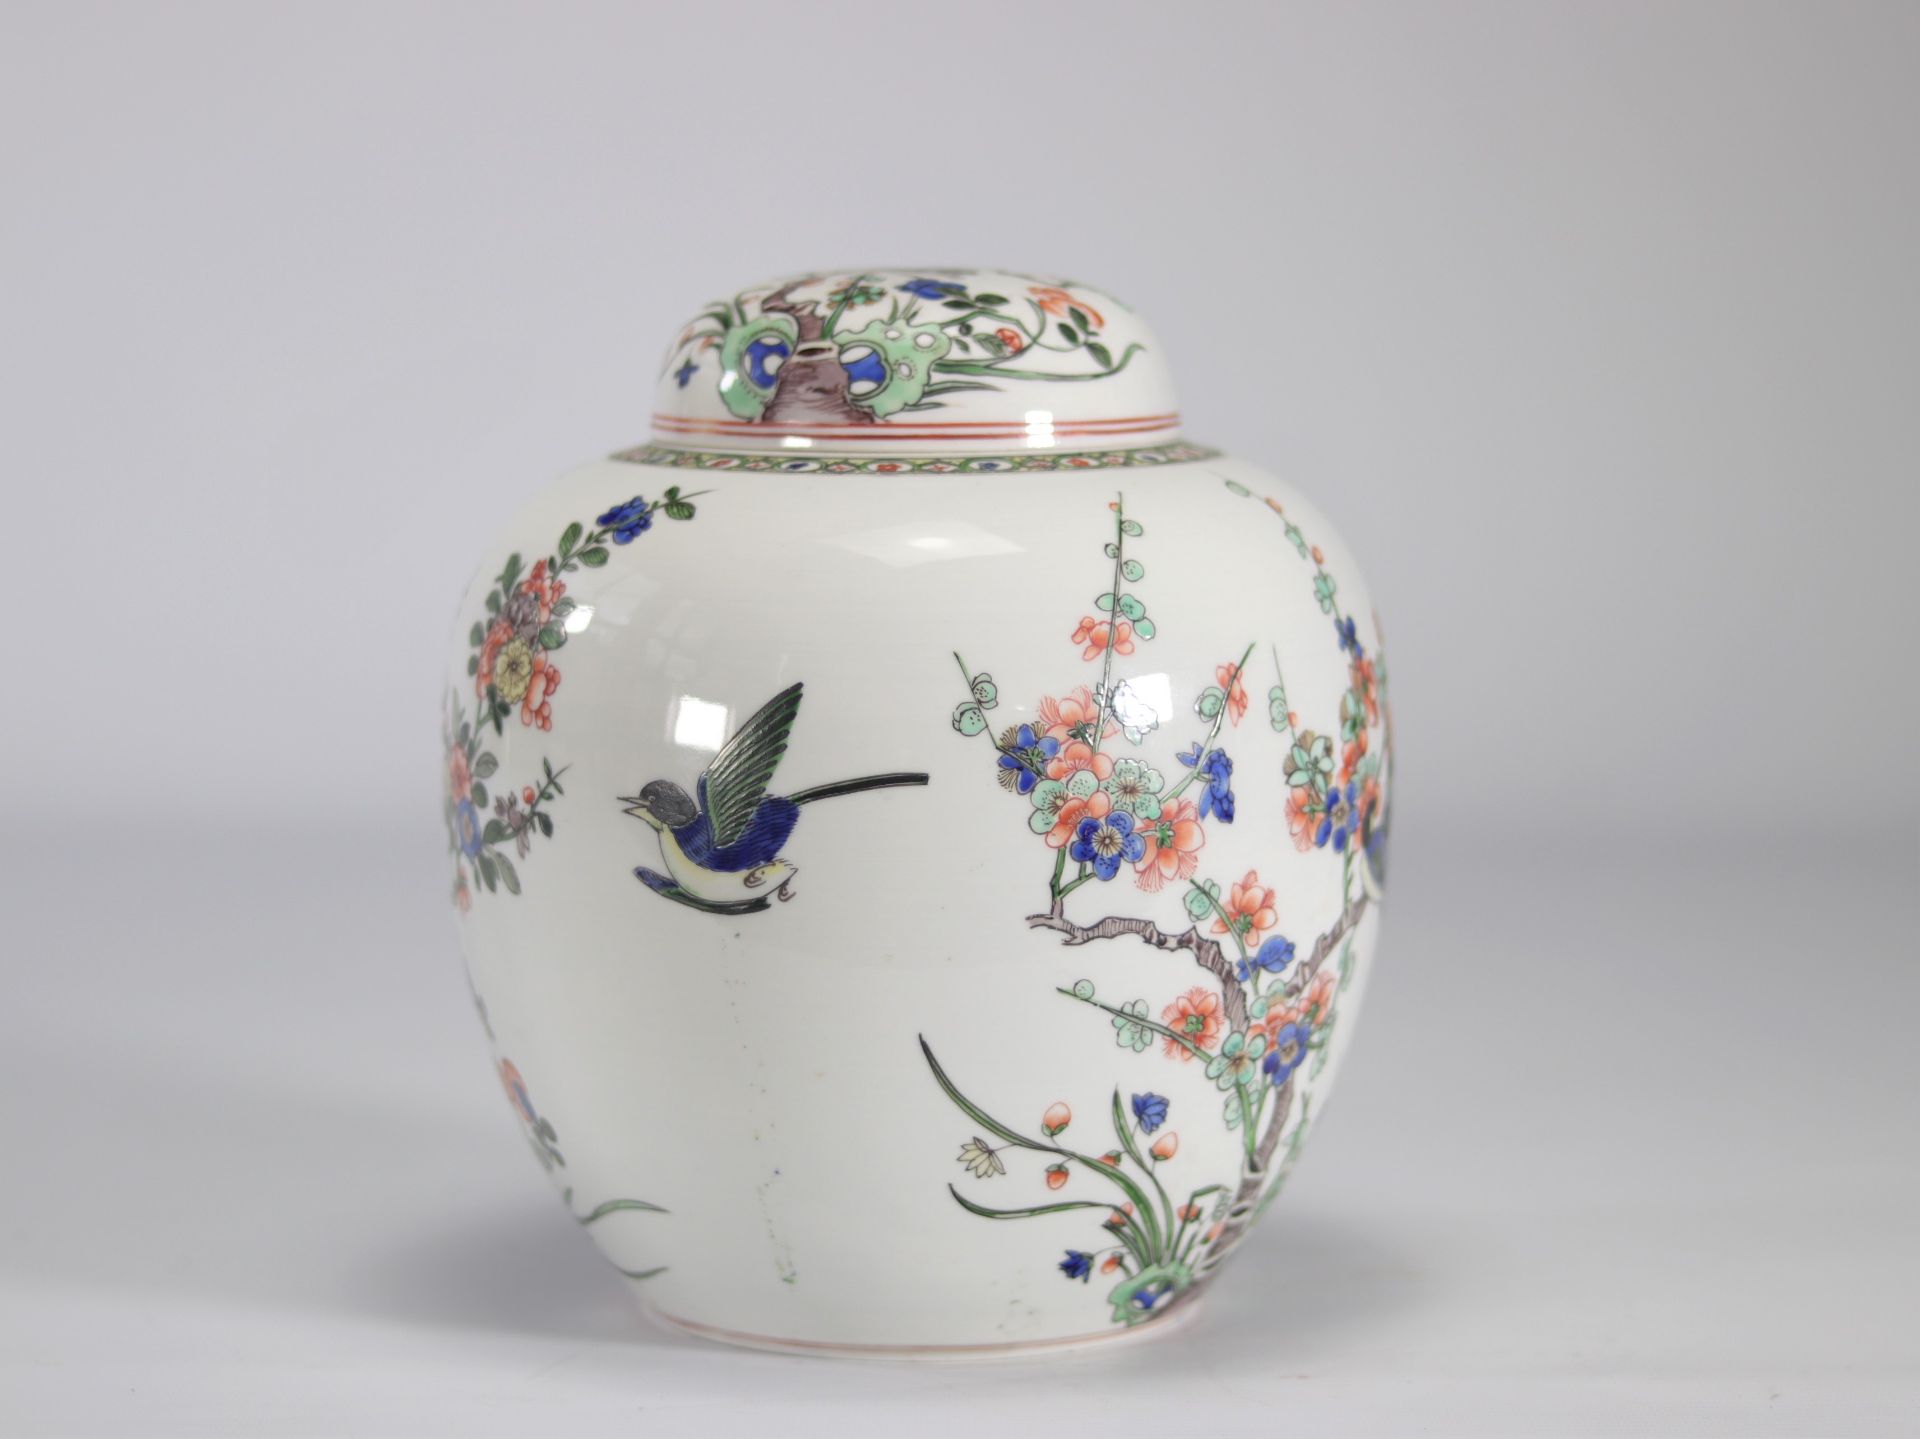 Covered vase in Chinese porcelain of the famille verte decorated with birds - Image 3 of 5